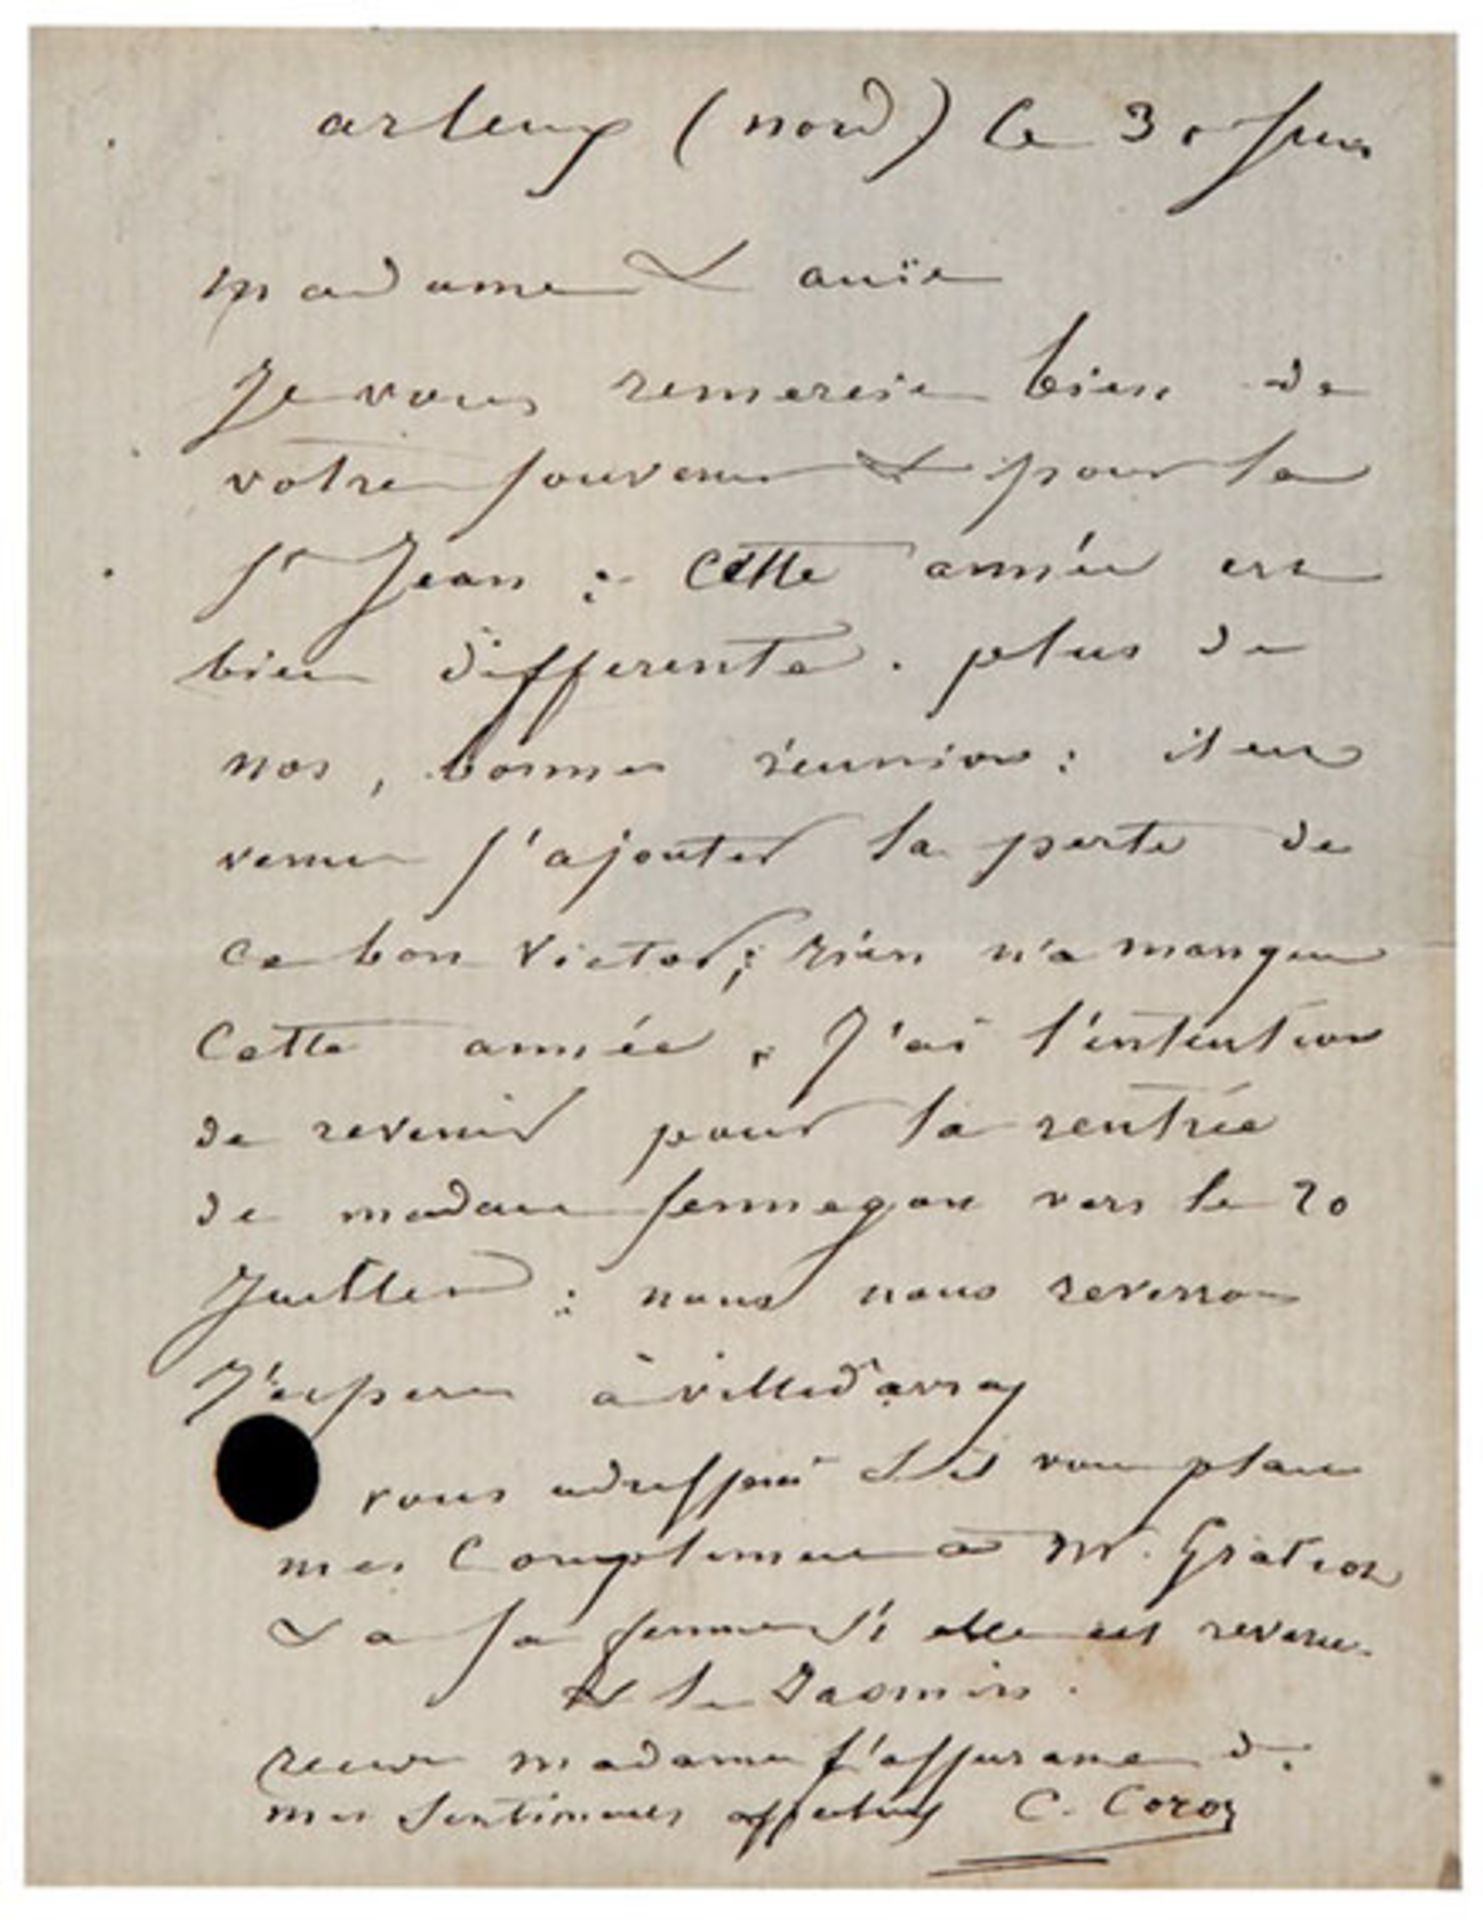 COROT, Jean-Baptiste Camille (1796-1875). Signed autograph letter in French to Madame ? Arleux-du-